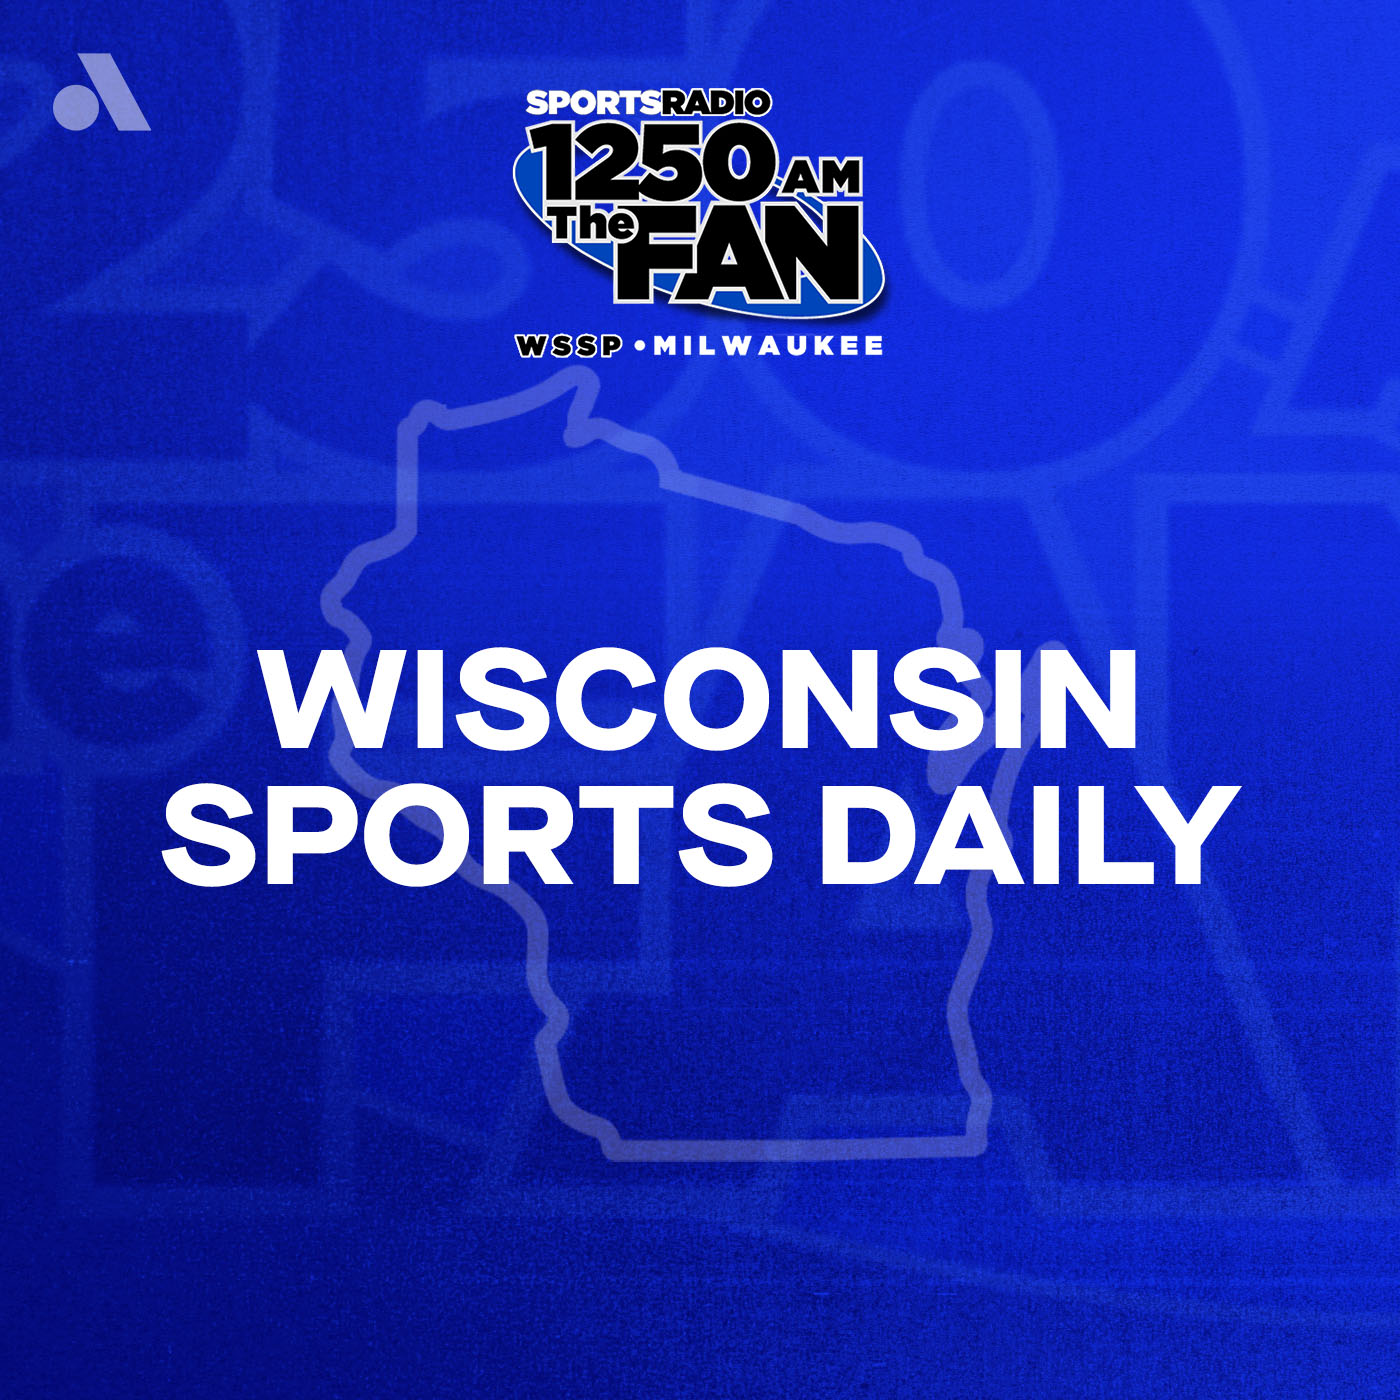 Thursday, May 2nd: Dustin Rhoades of 670 The Score Joins Wisconsin Sports Daily!